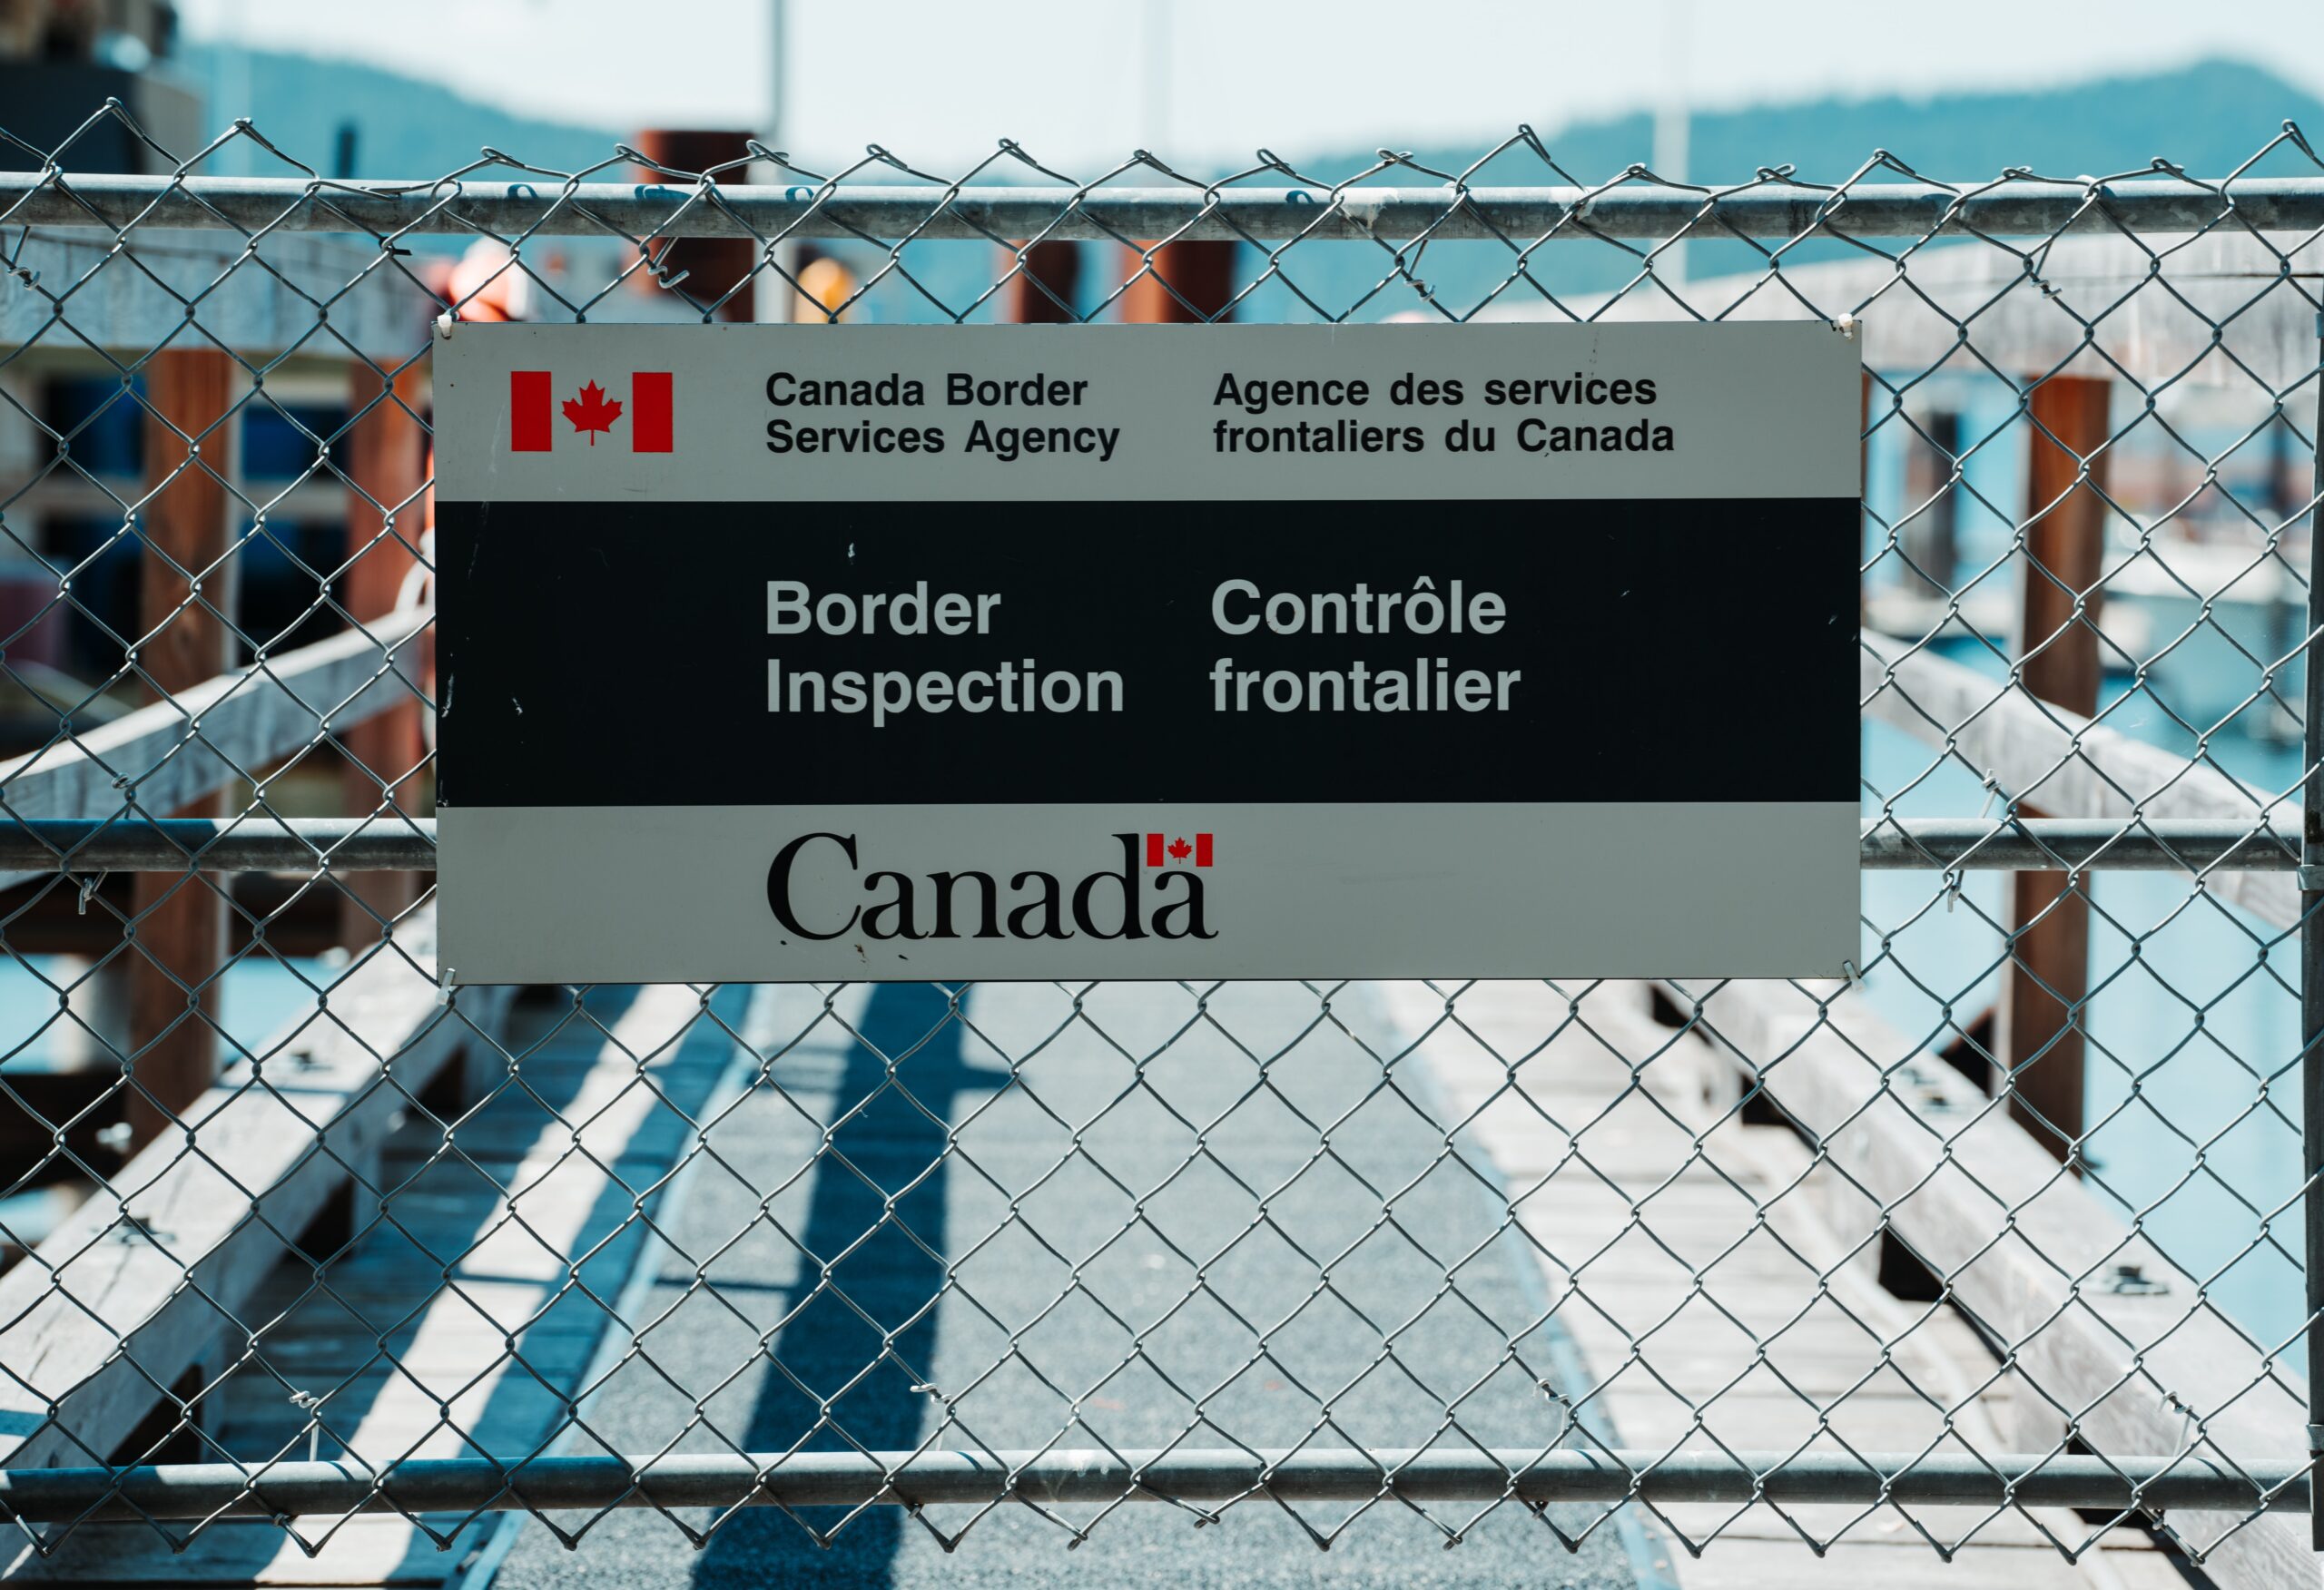 A sign for the Canadian border inspection attached to a chain link fence